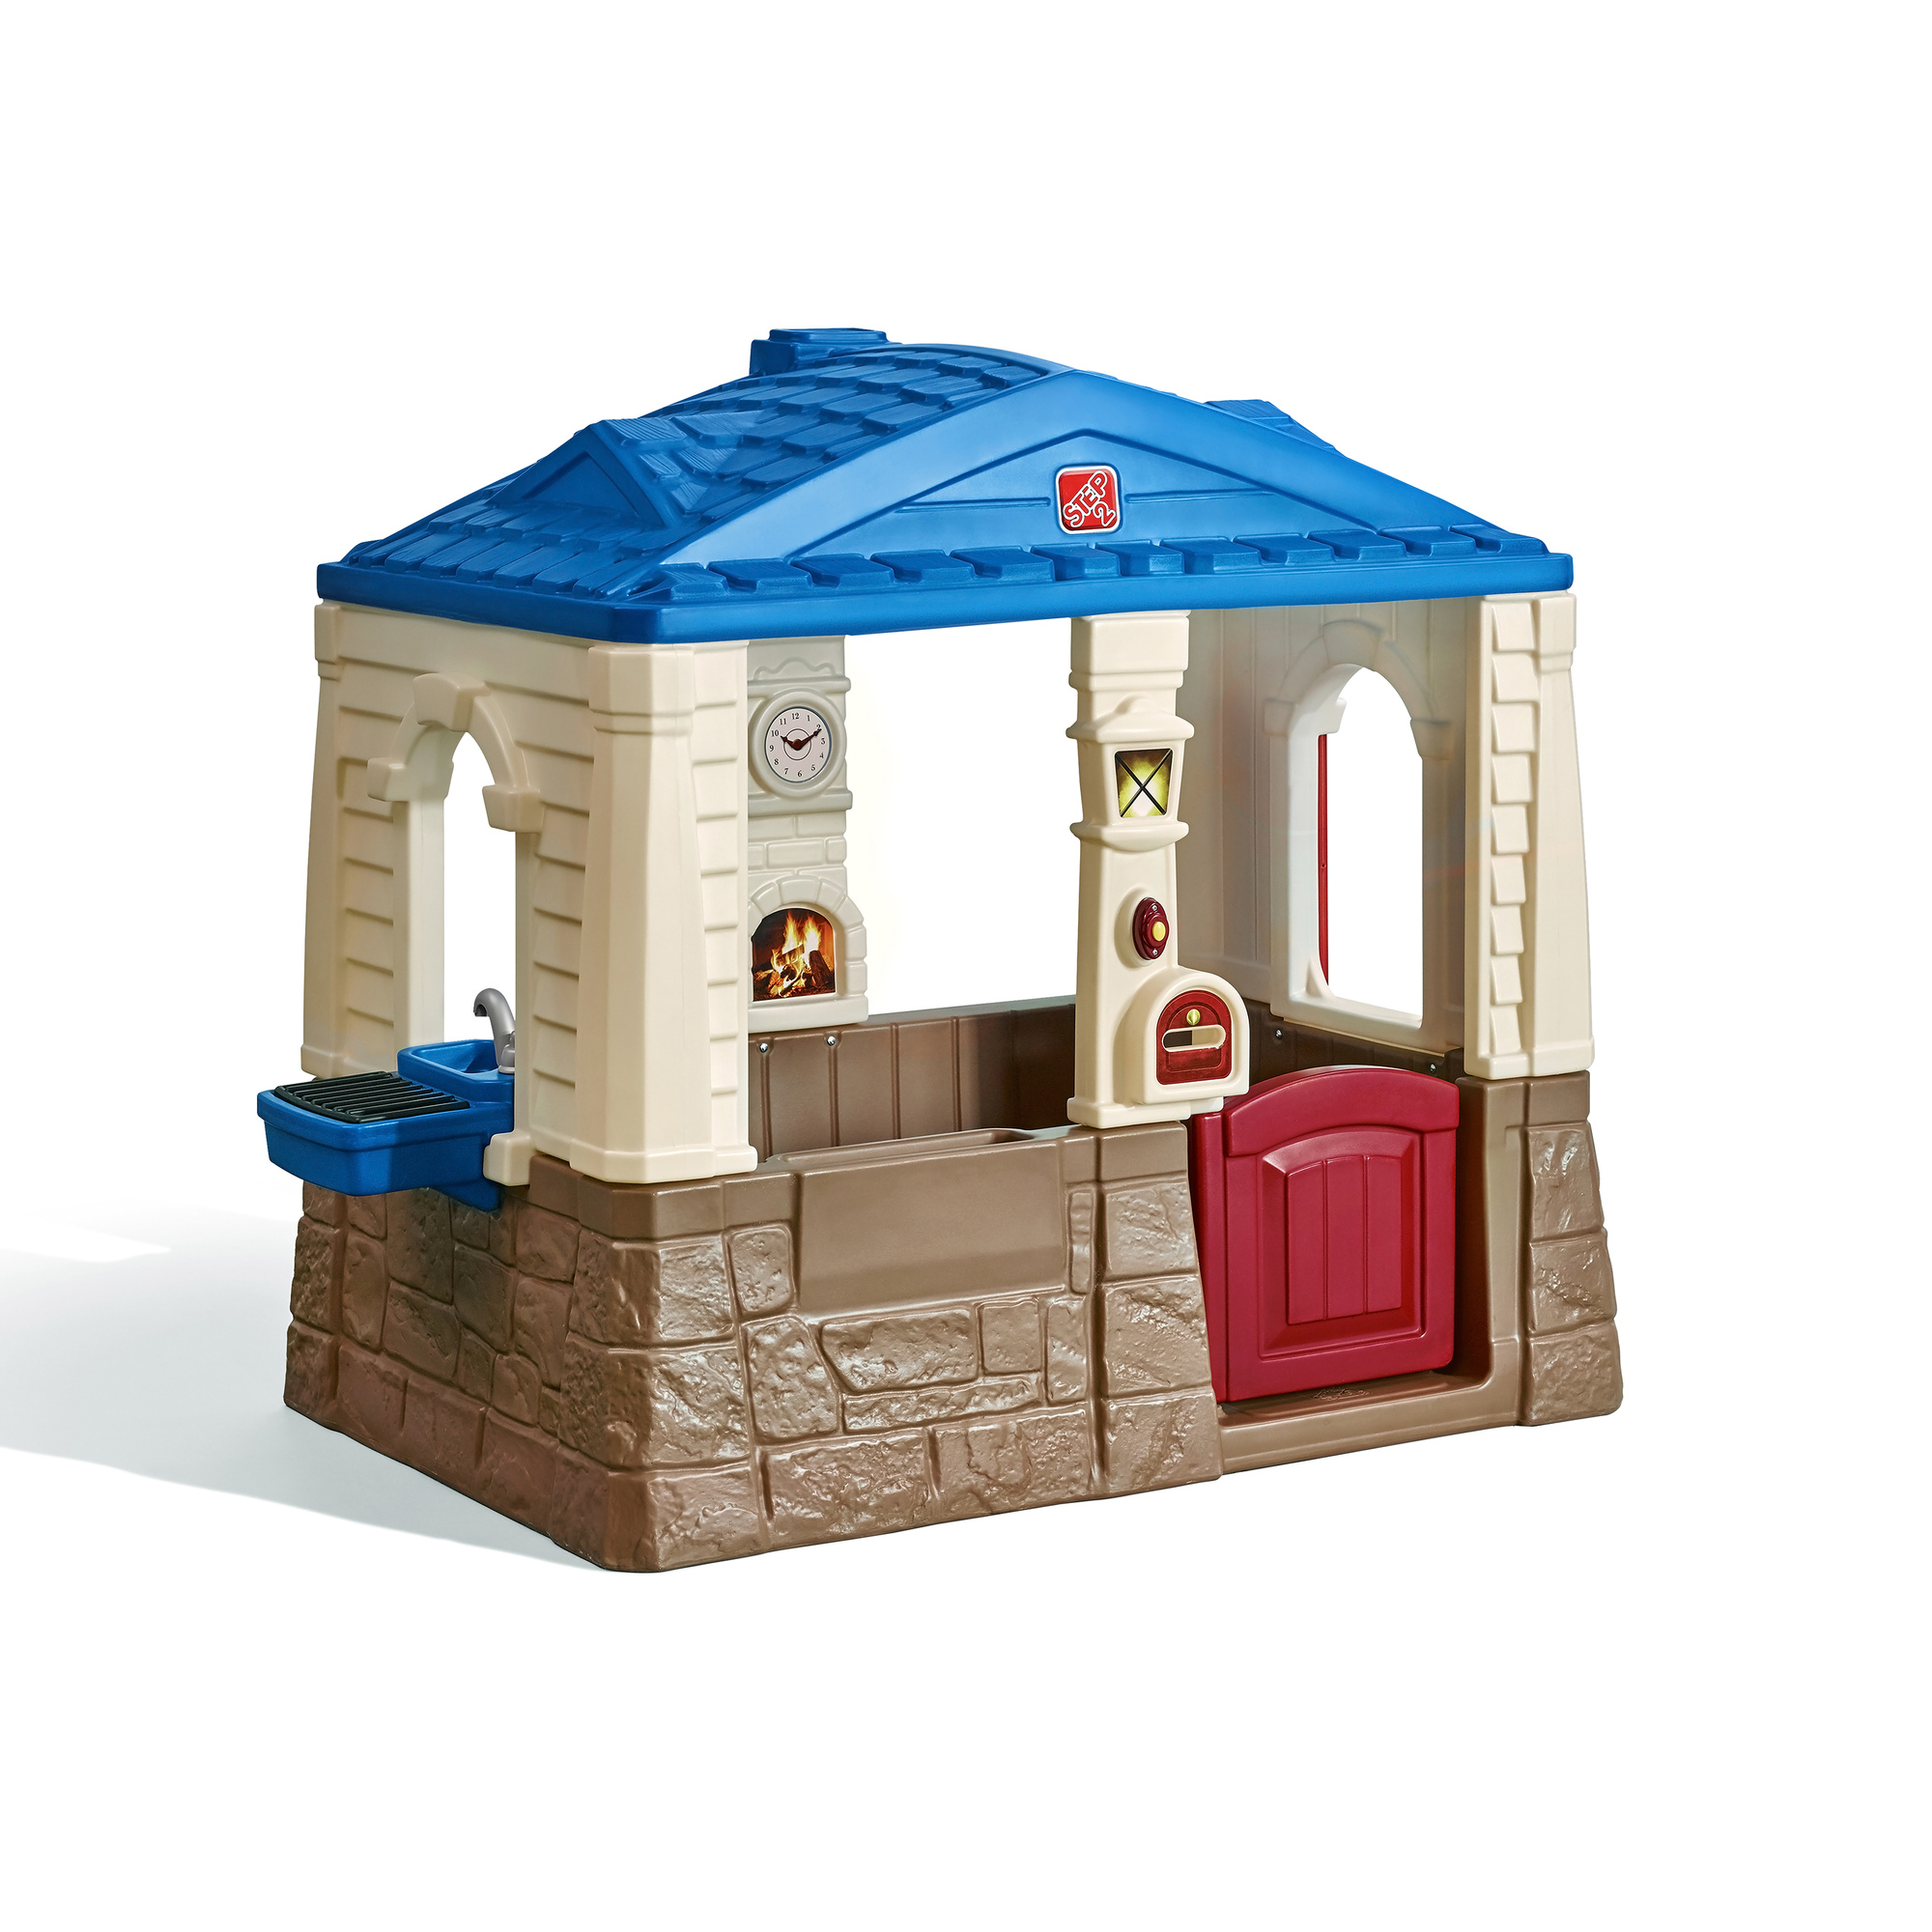 Step2 Neat & Tidy Cottage Playhouse Plastic Kids Outdoor Toys - image 1 of 10